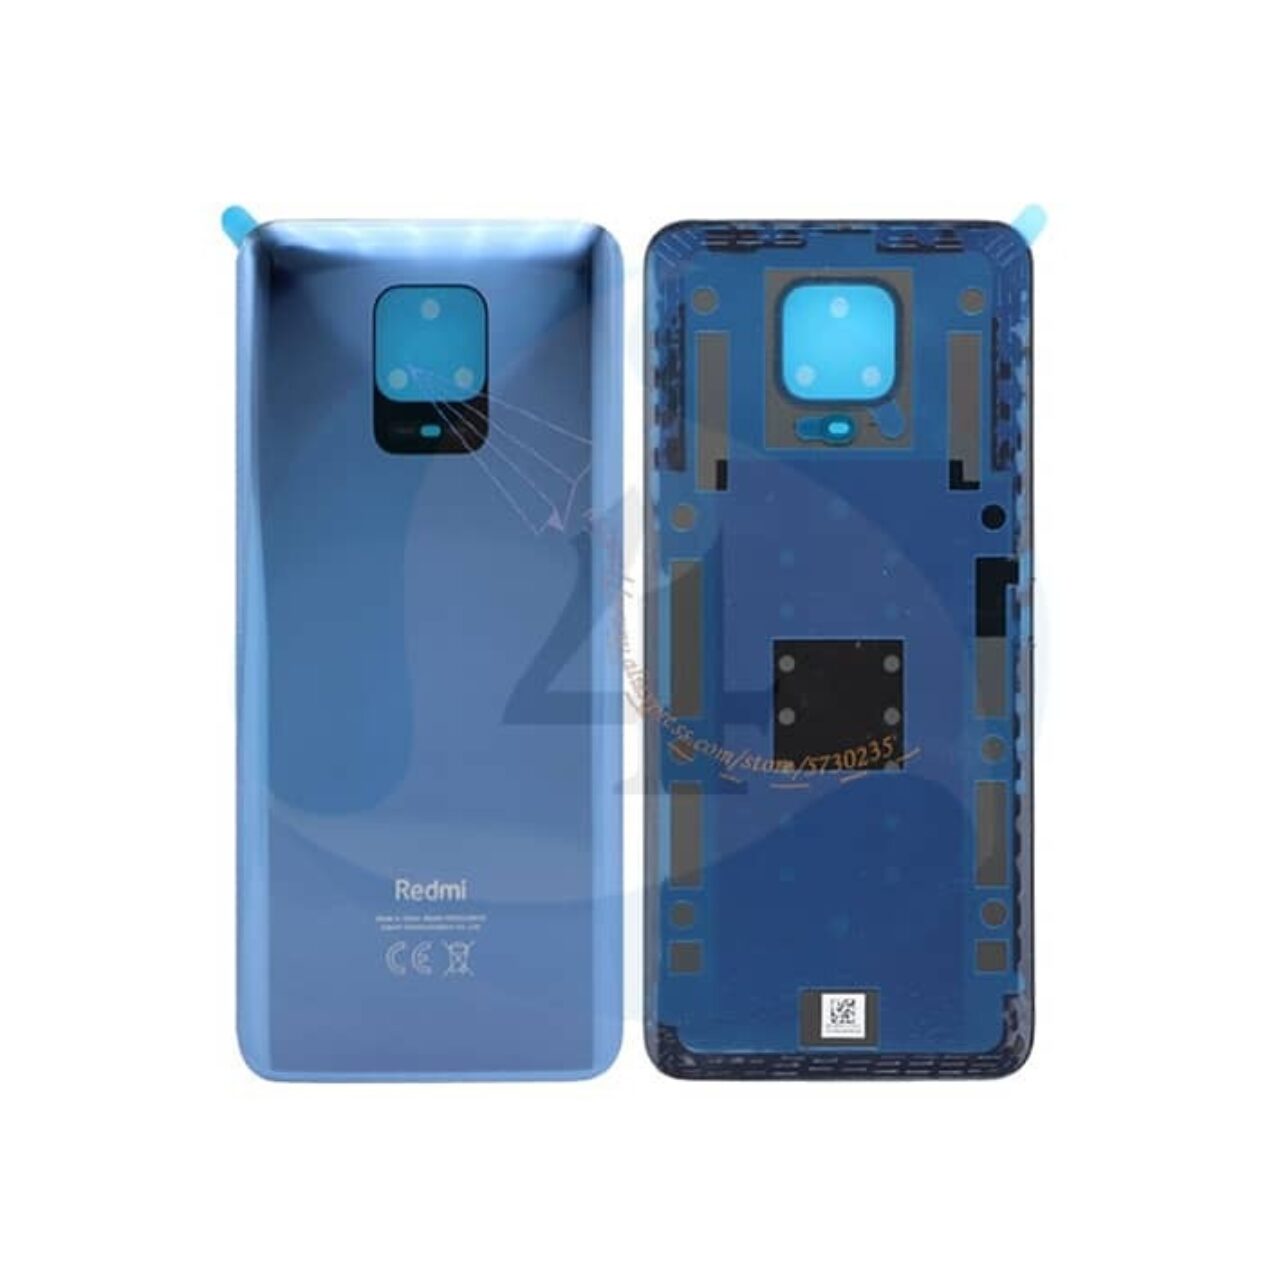 Backcover Blue For Xiaomi Redmi Note 9 Pro Note 9 S